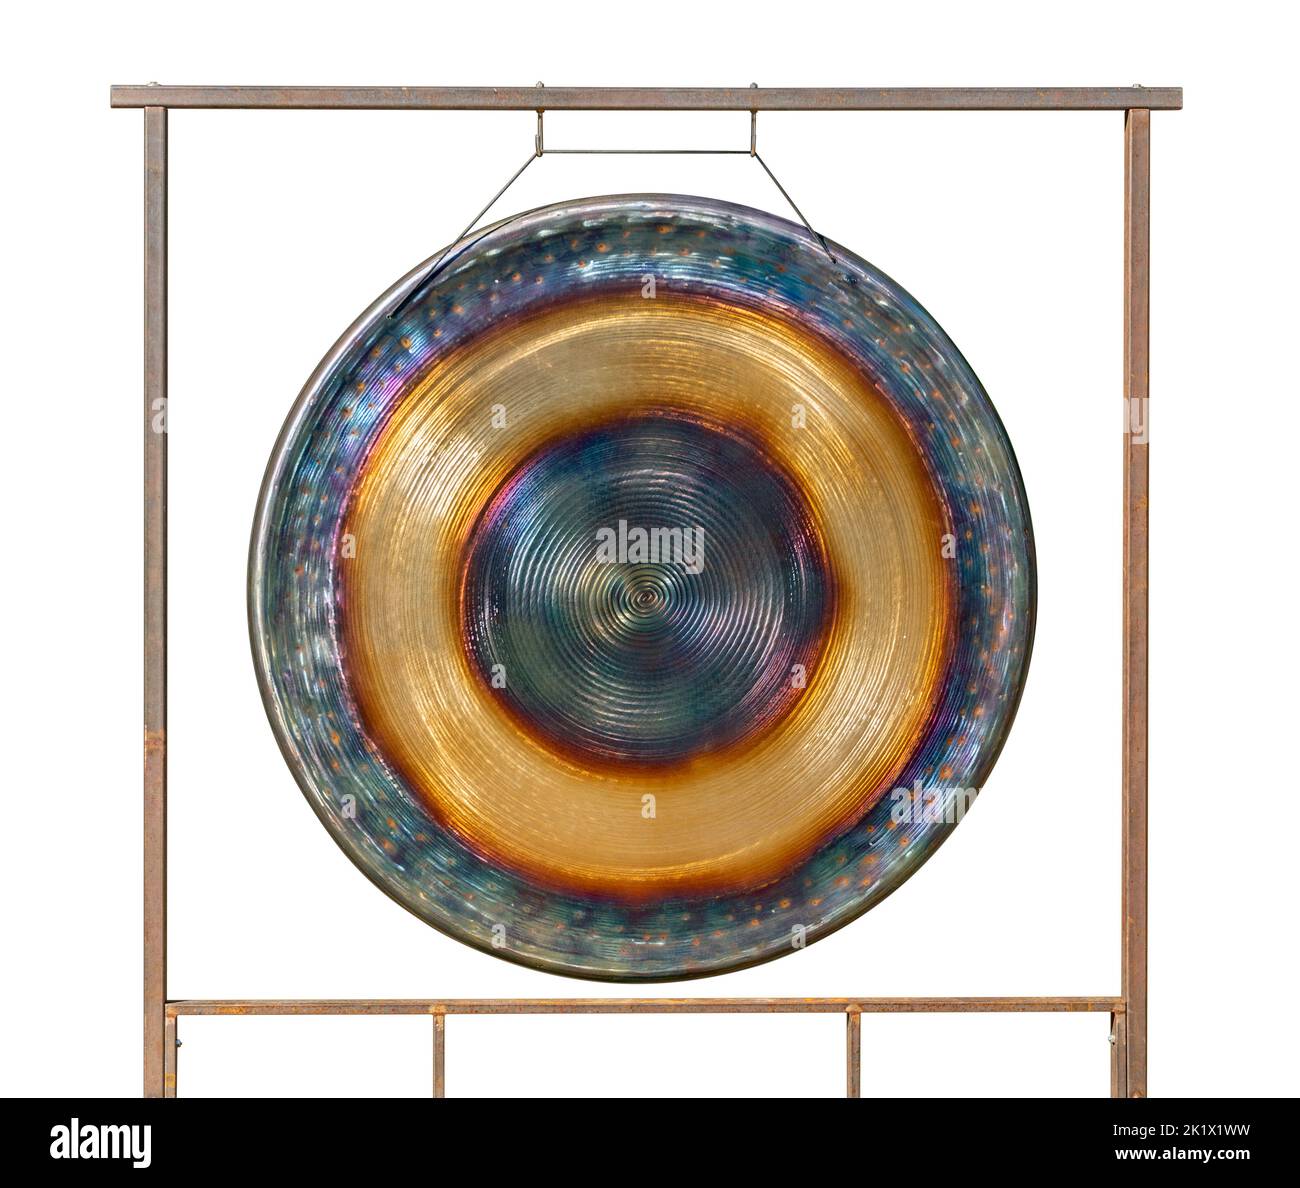 Colorful metallic gong hanging in a frame isolated in white back Stock Photo